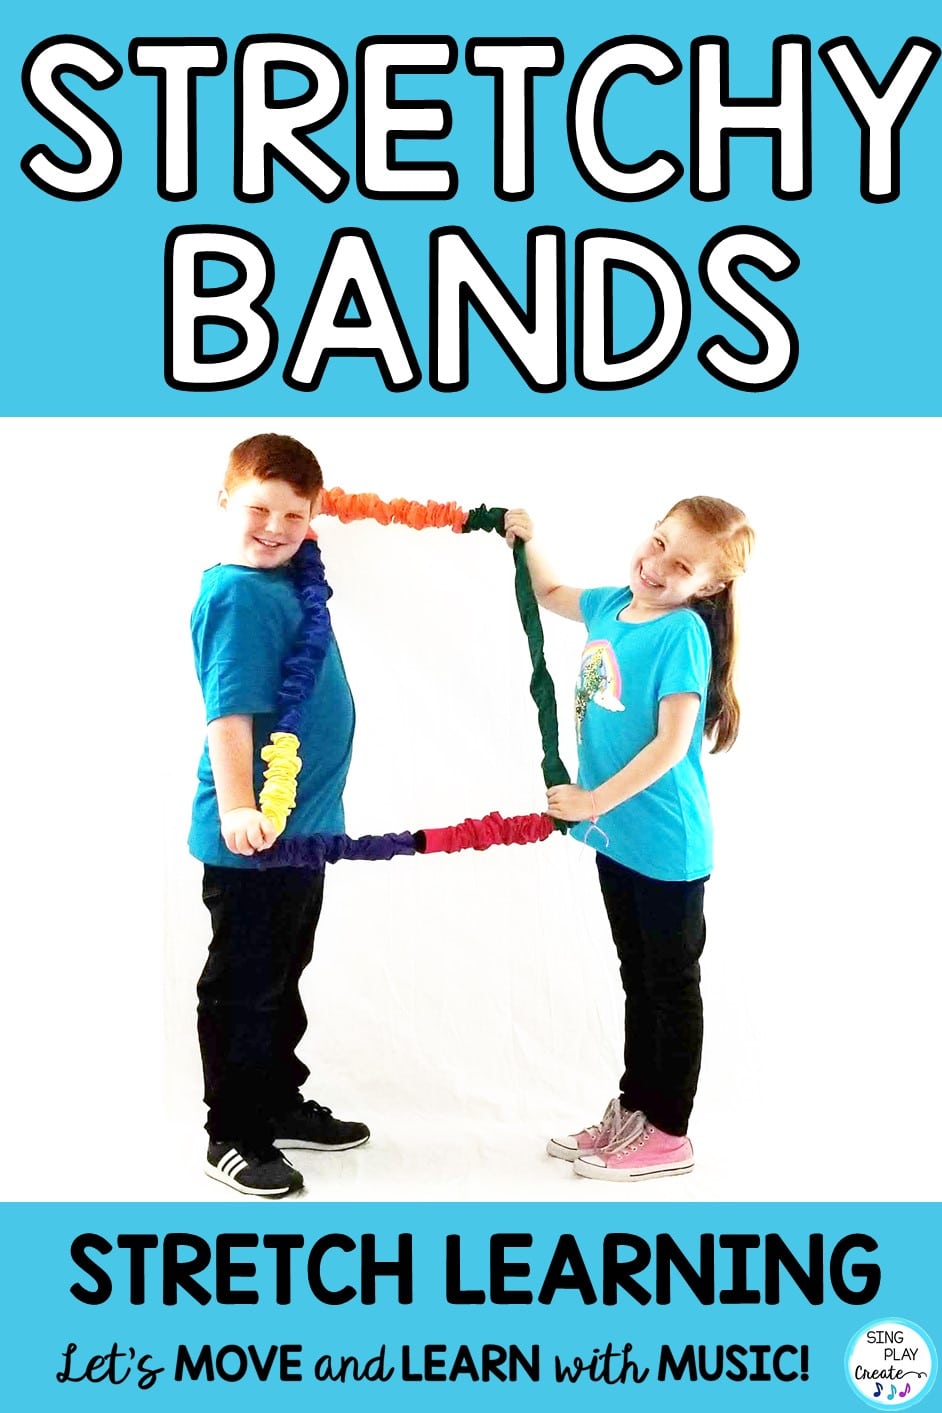 Sing sing band. Stretching Bands. Stretch Learning. Картинка Let's move and learn with Music. Stretch Band retard.